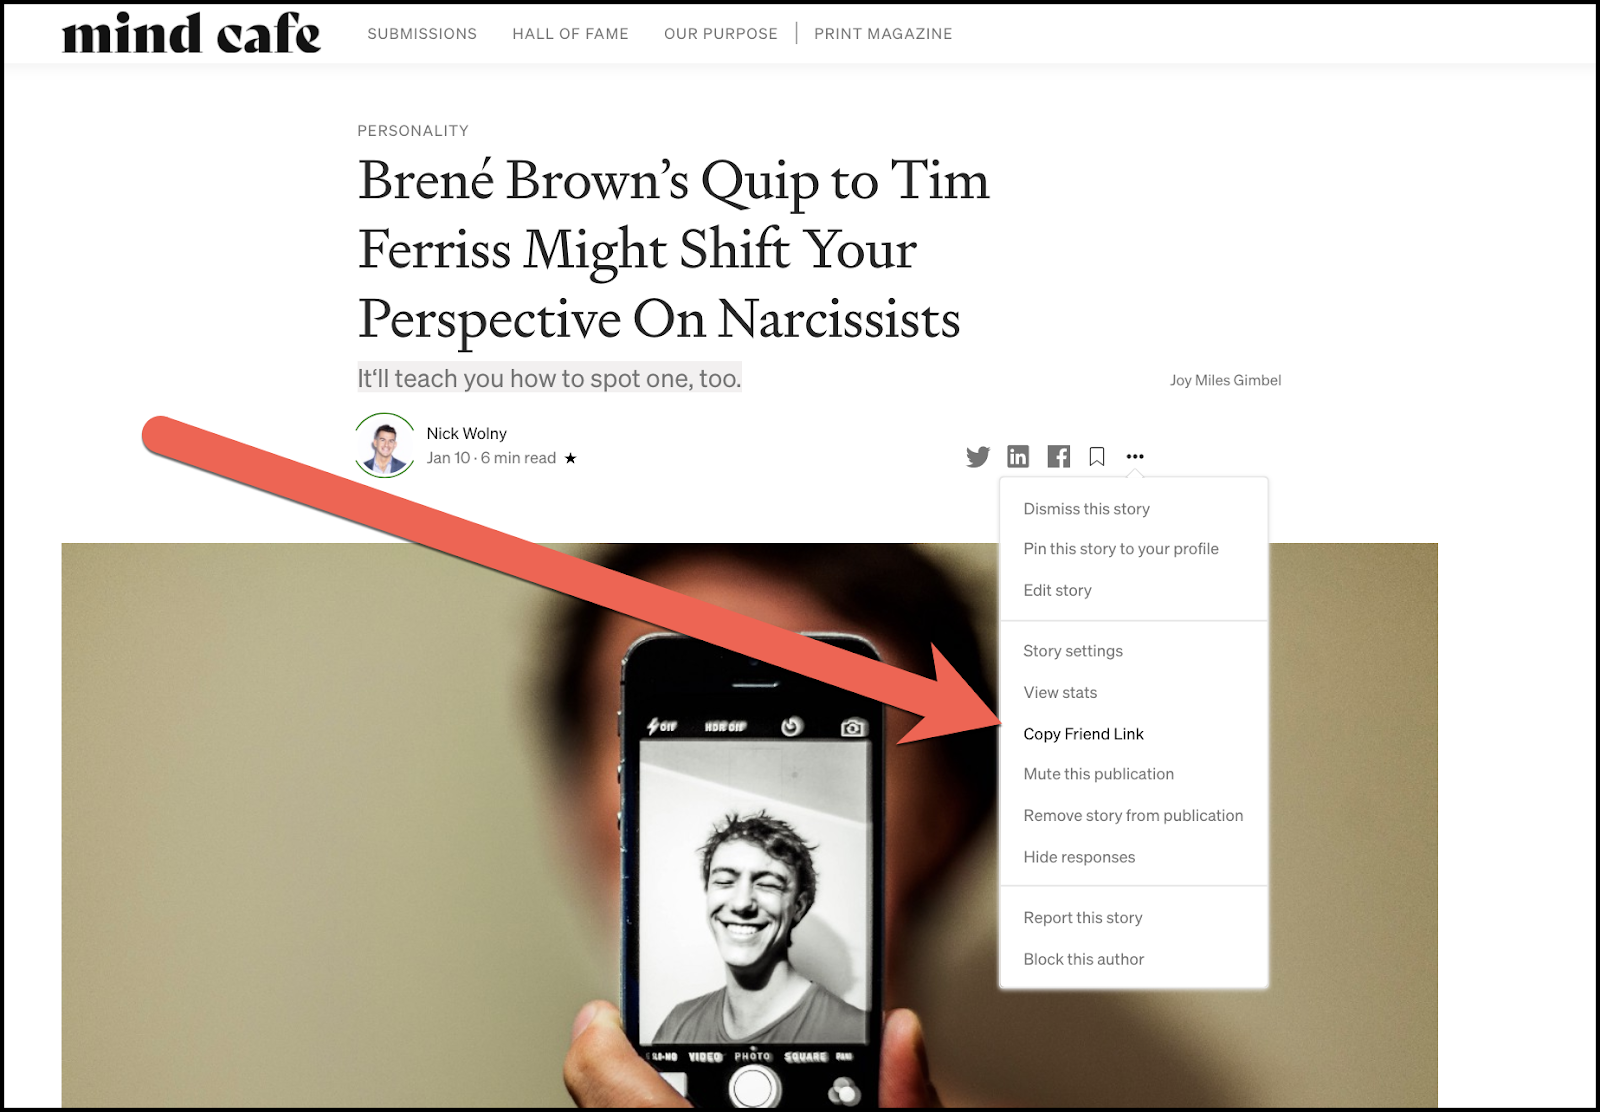 how to write articles in medium